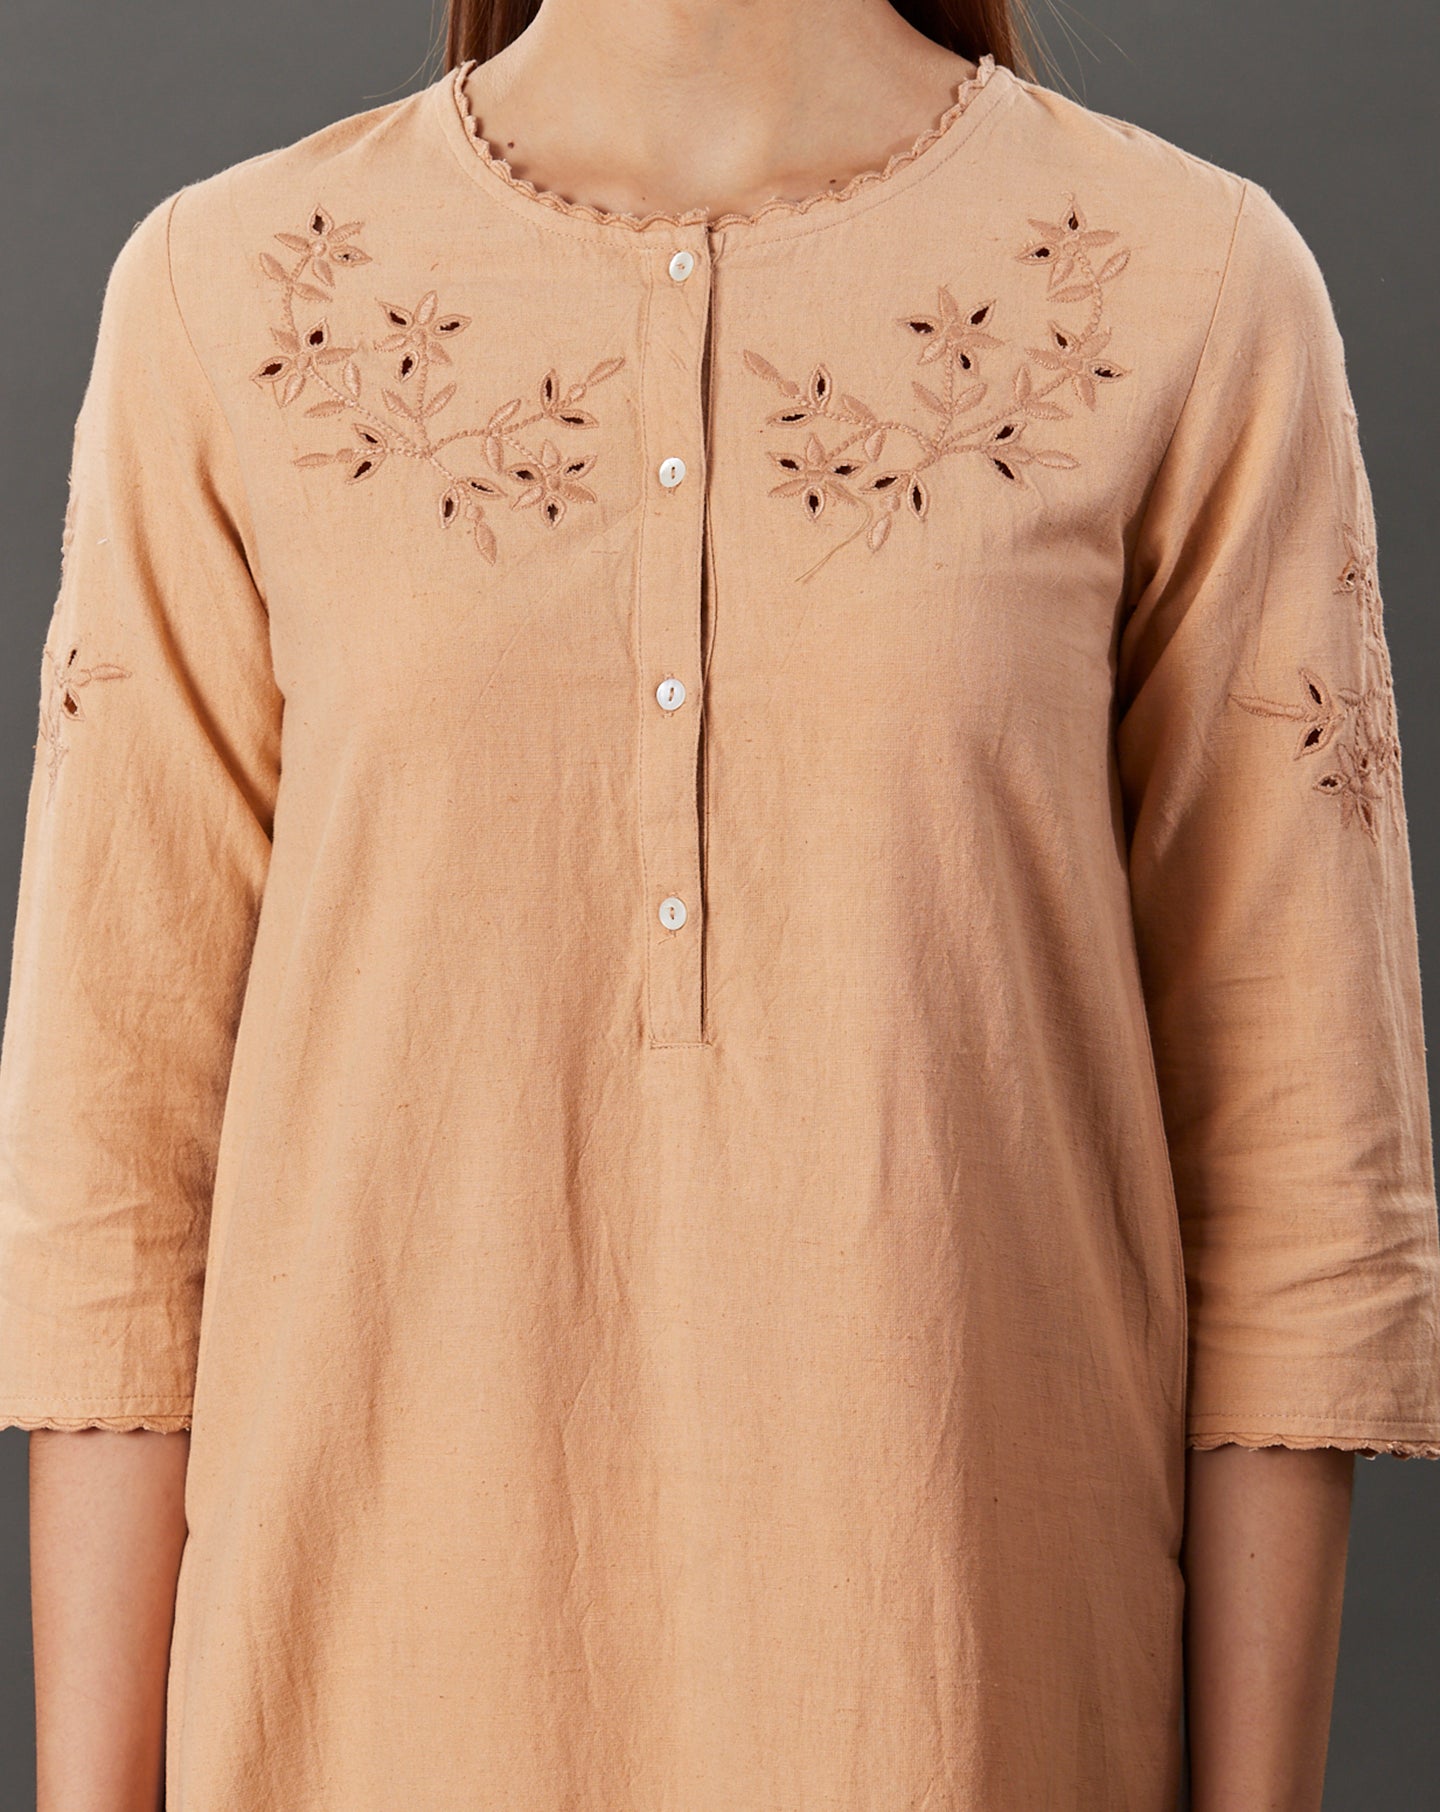 BEIGE CUTWORK EMBROIDERED COTTON LINEN KURTA WITH PALAZZO